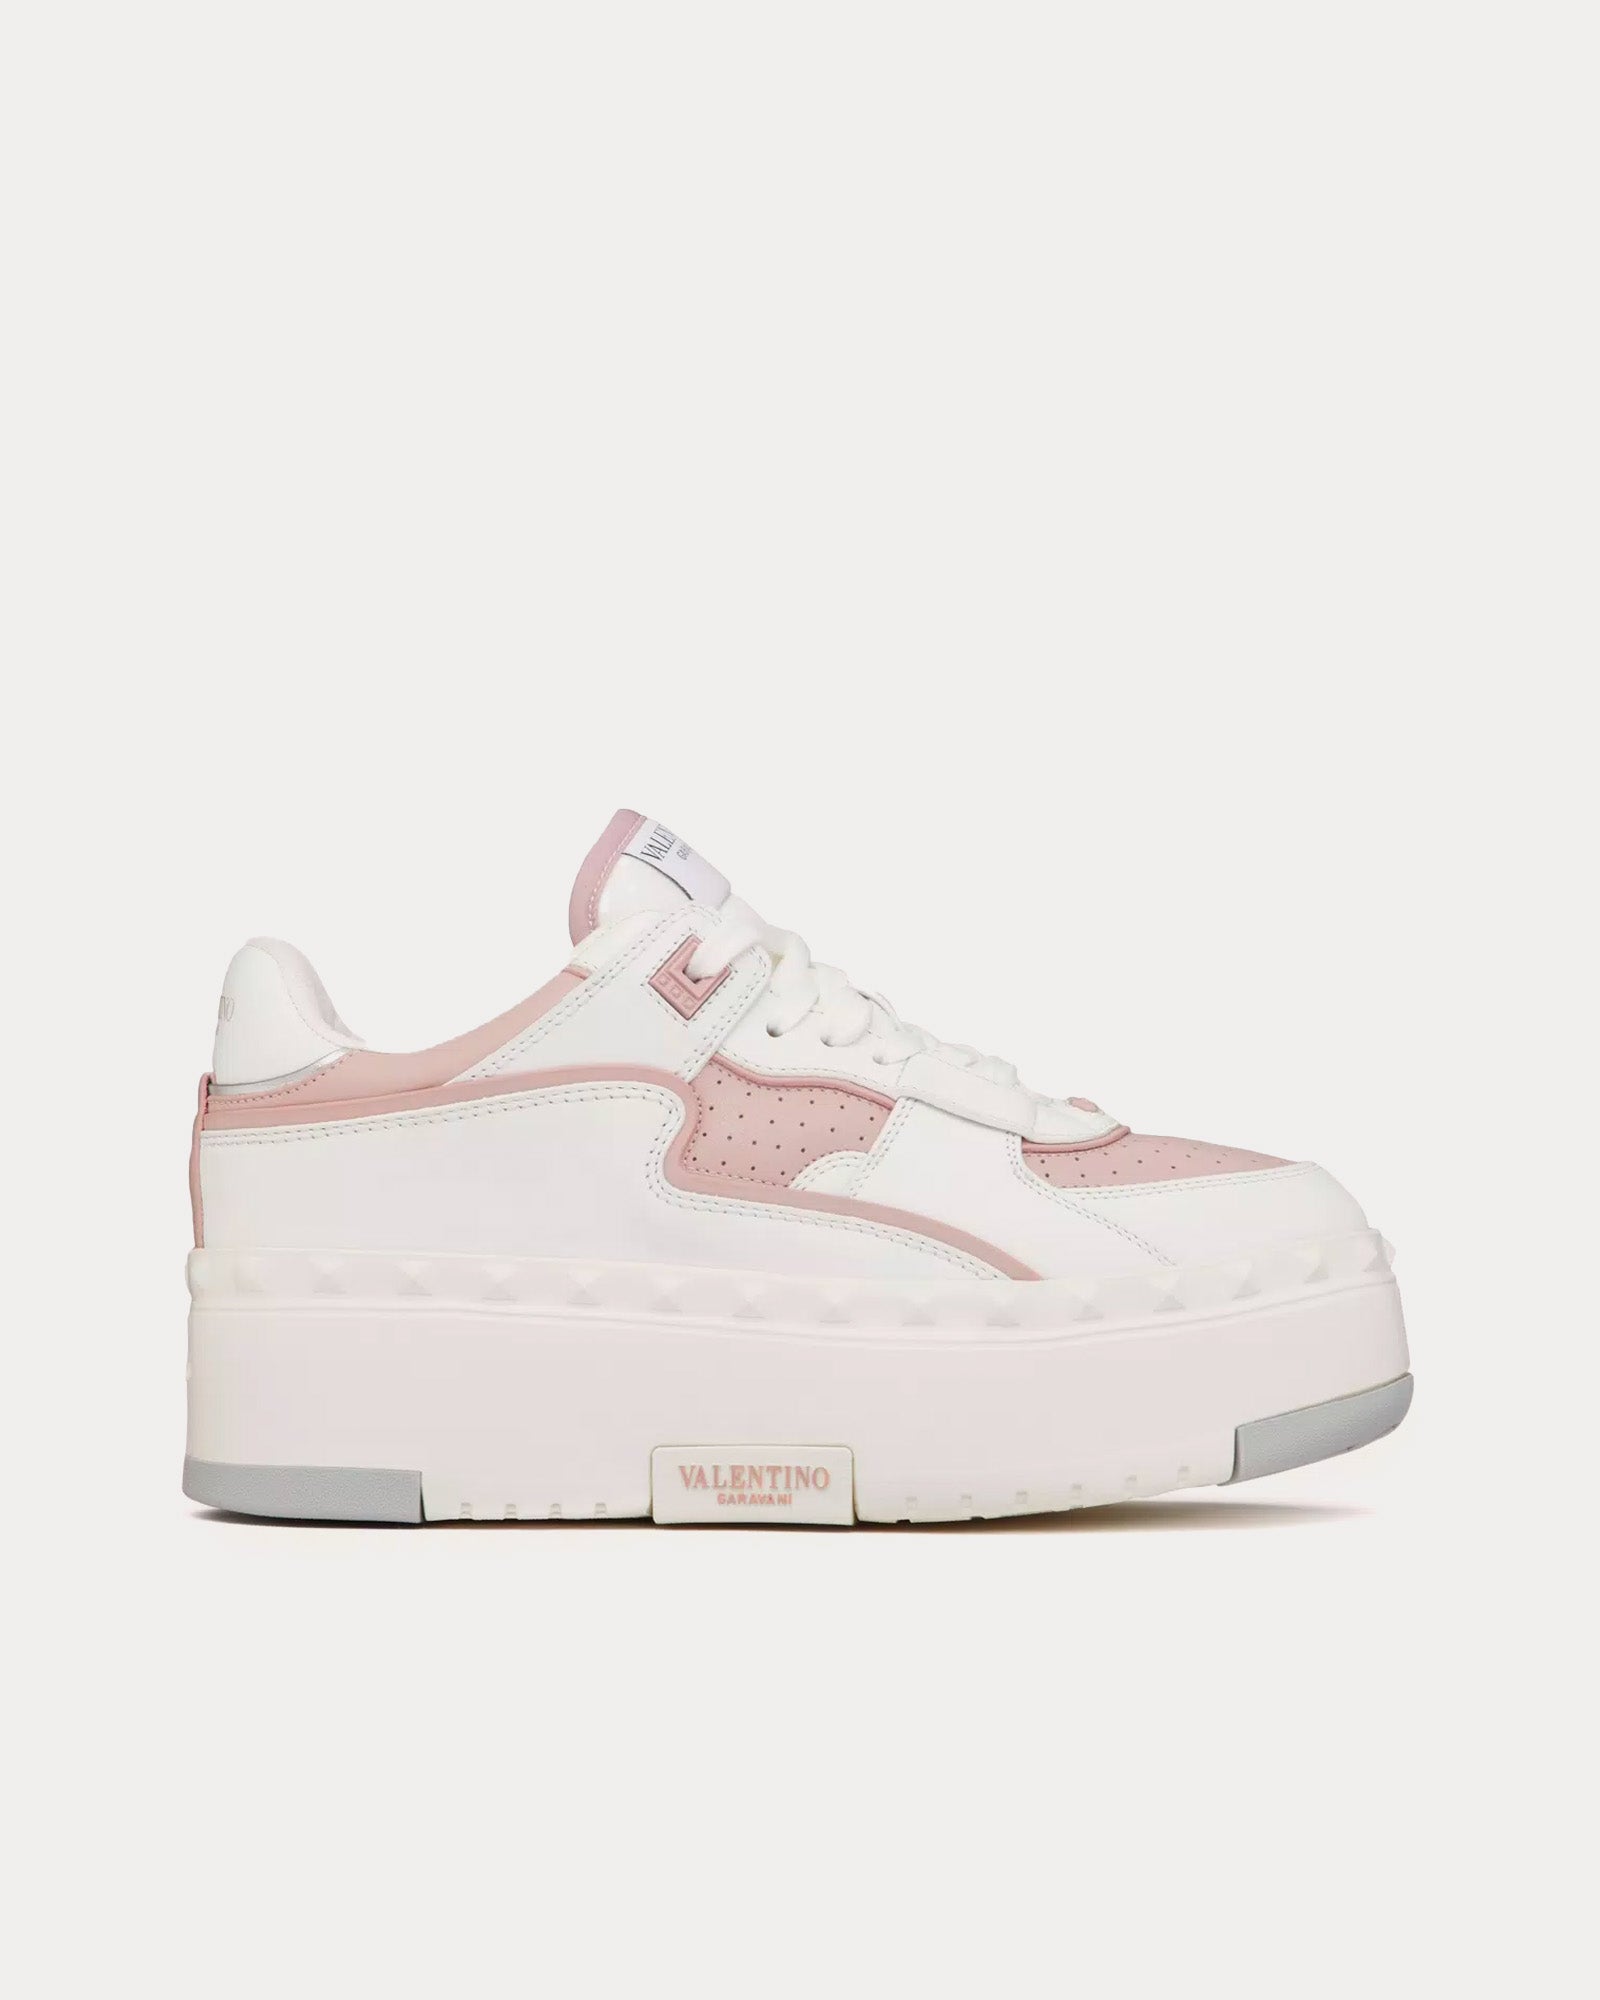 Valentino - Freedots XL Calfskin Leather White / Rose / Silver Low Top Sneakers